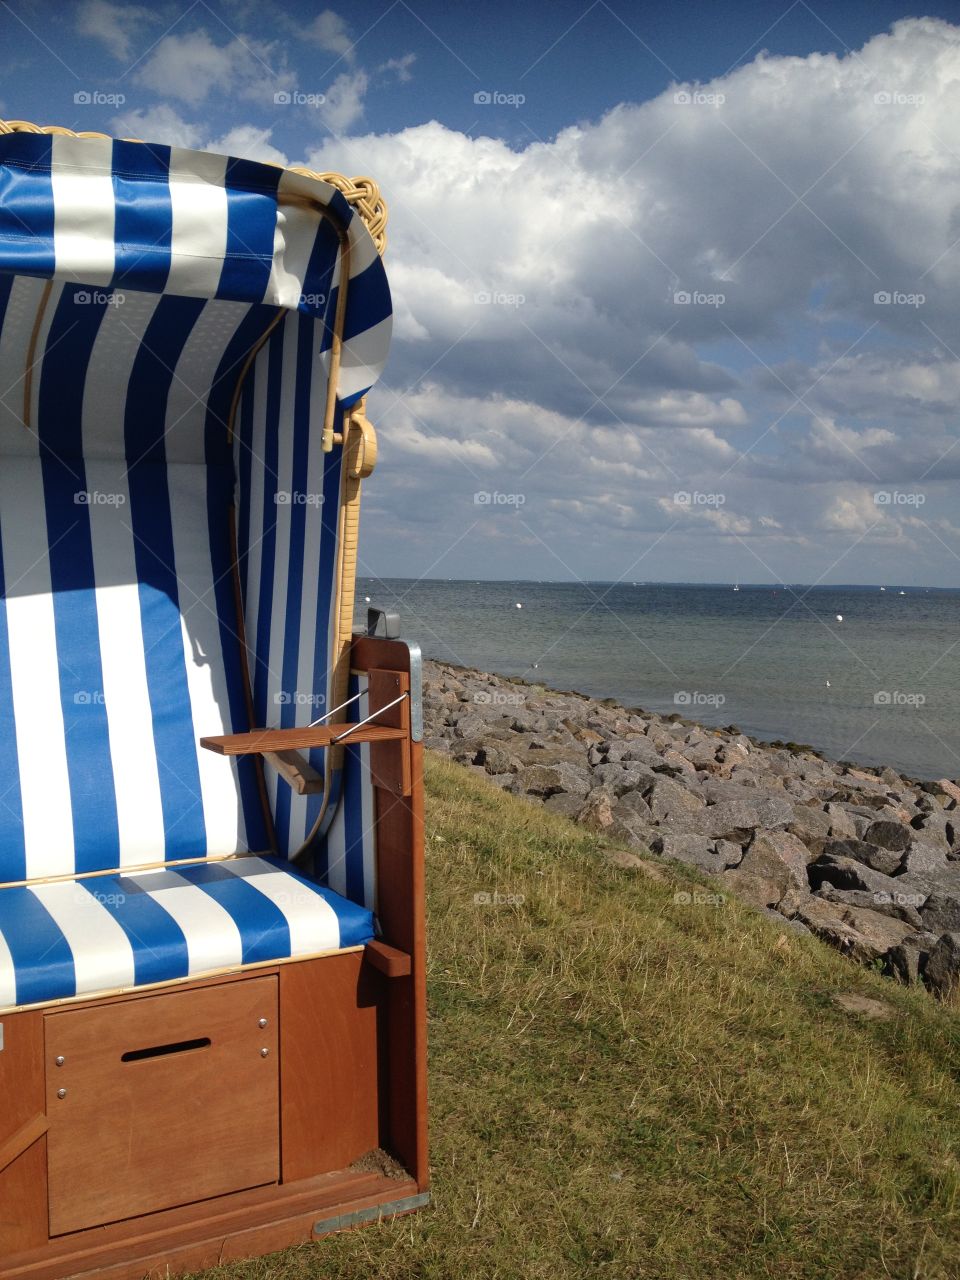 A day at the Baltic Sea